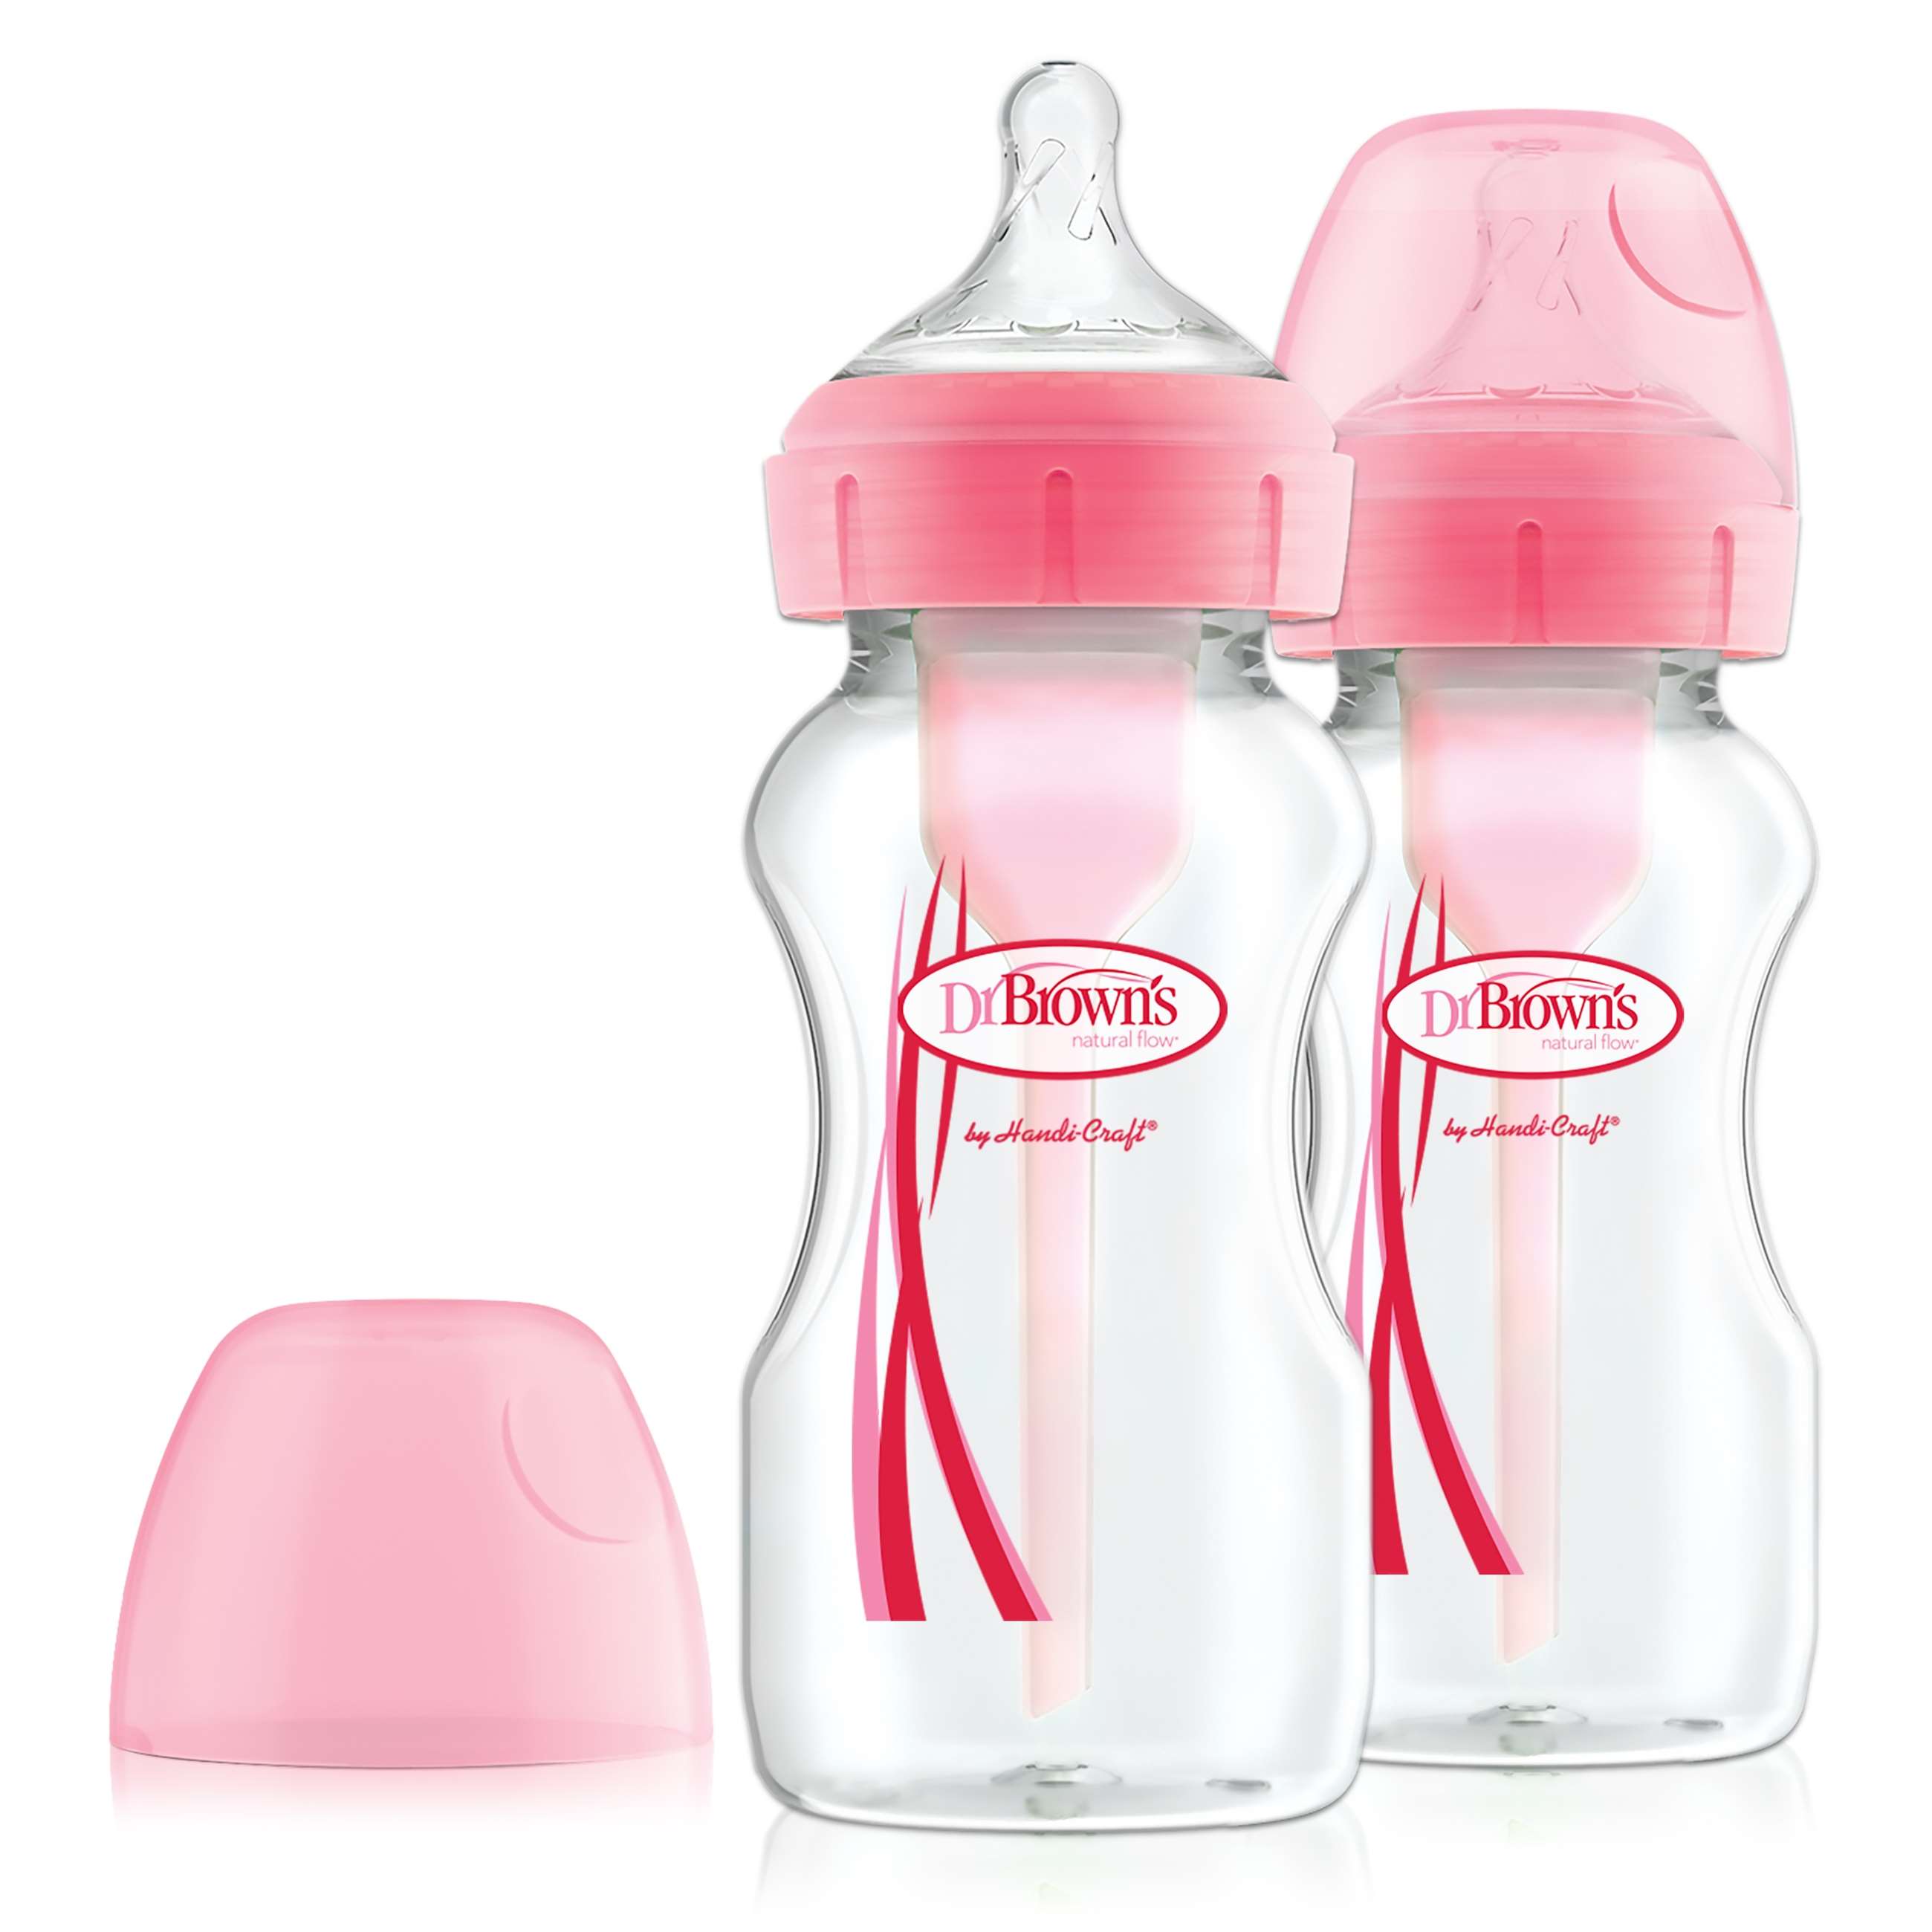 94007 product_options _wide-neck_9oz_270ml_2-pack_pink